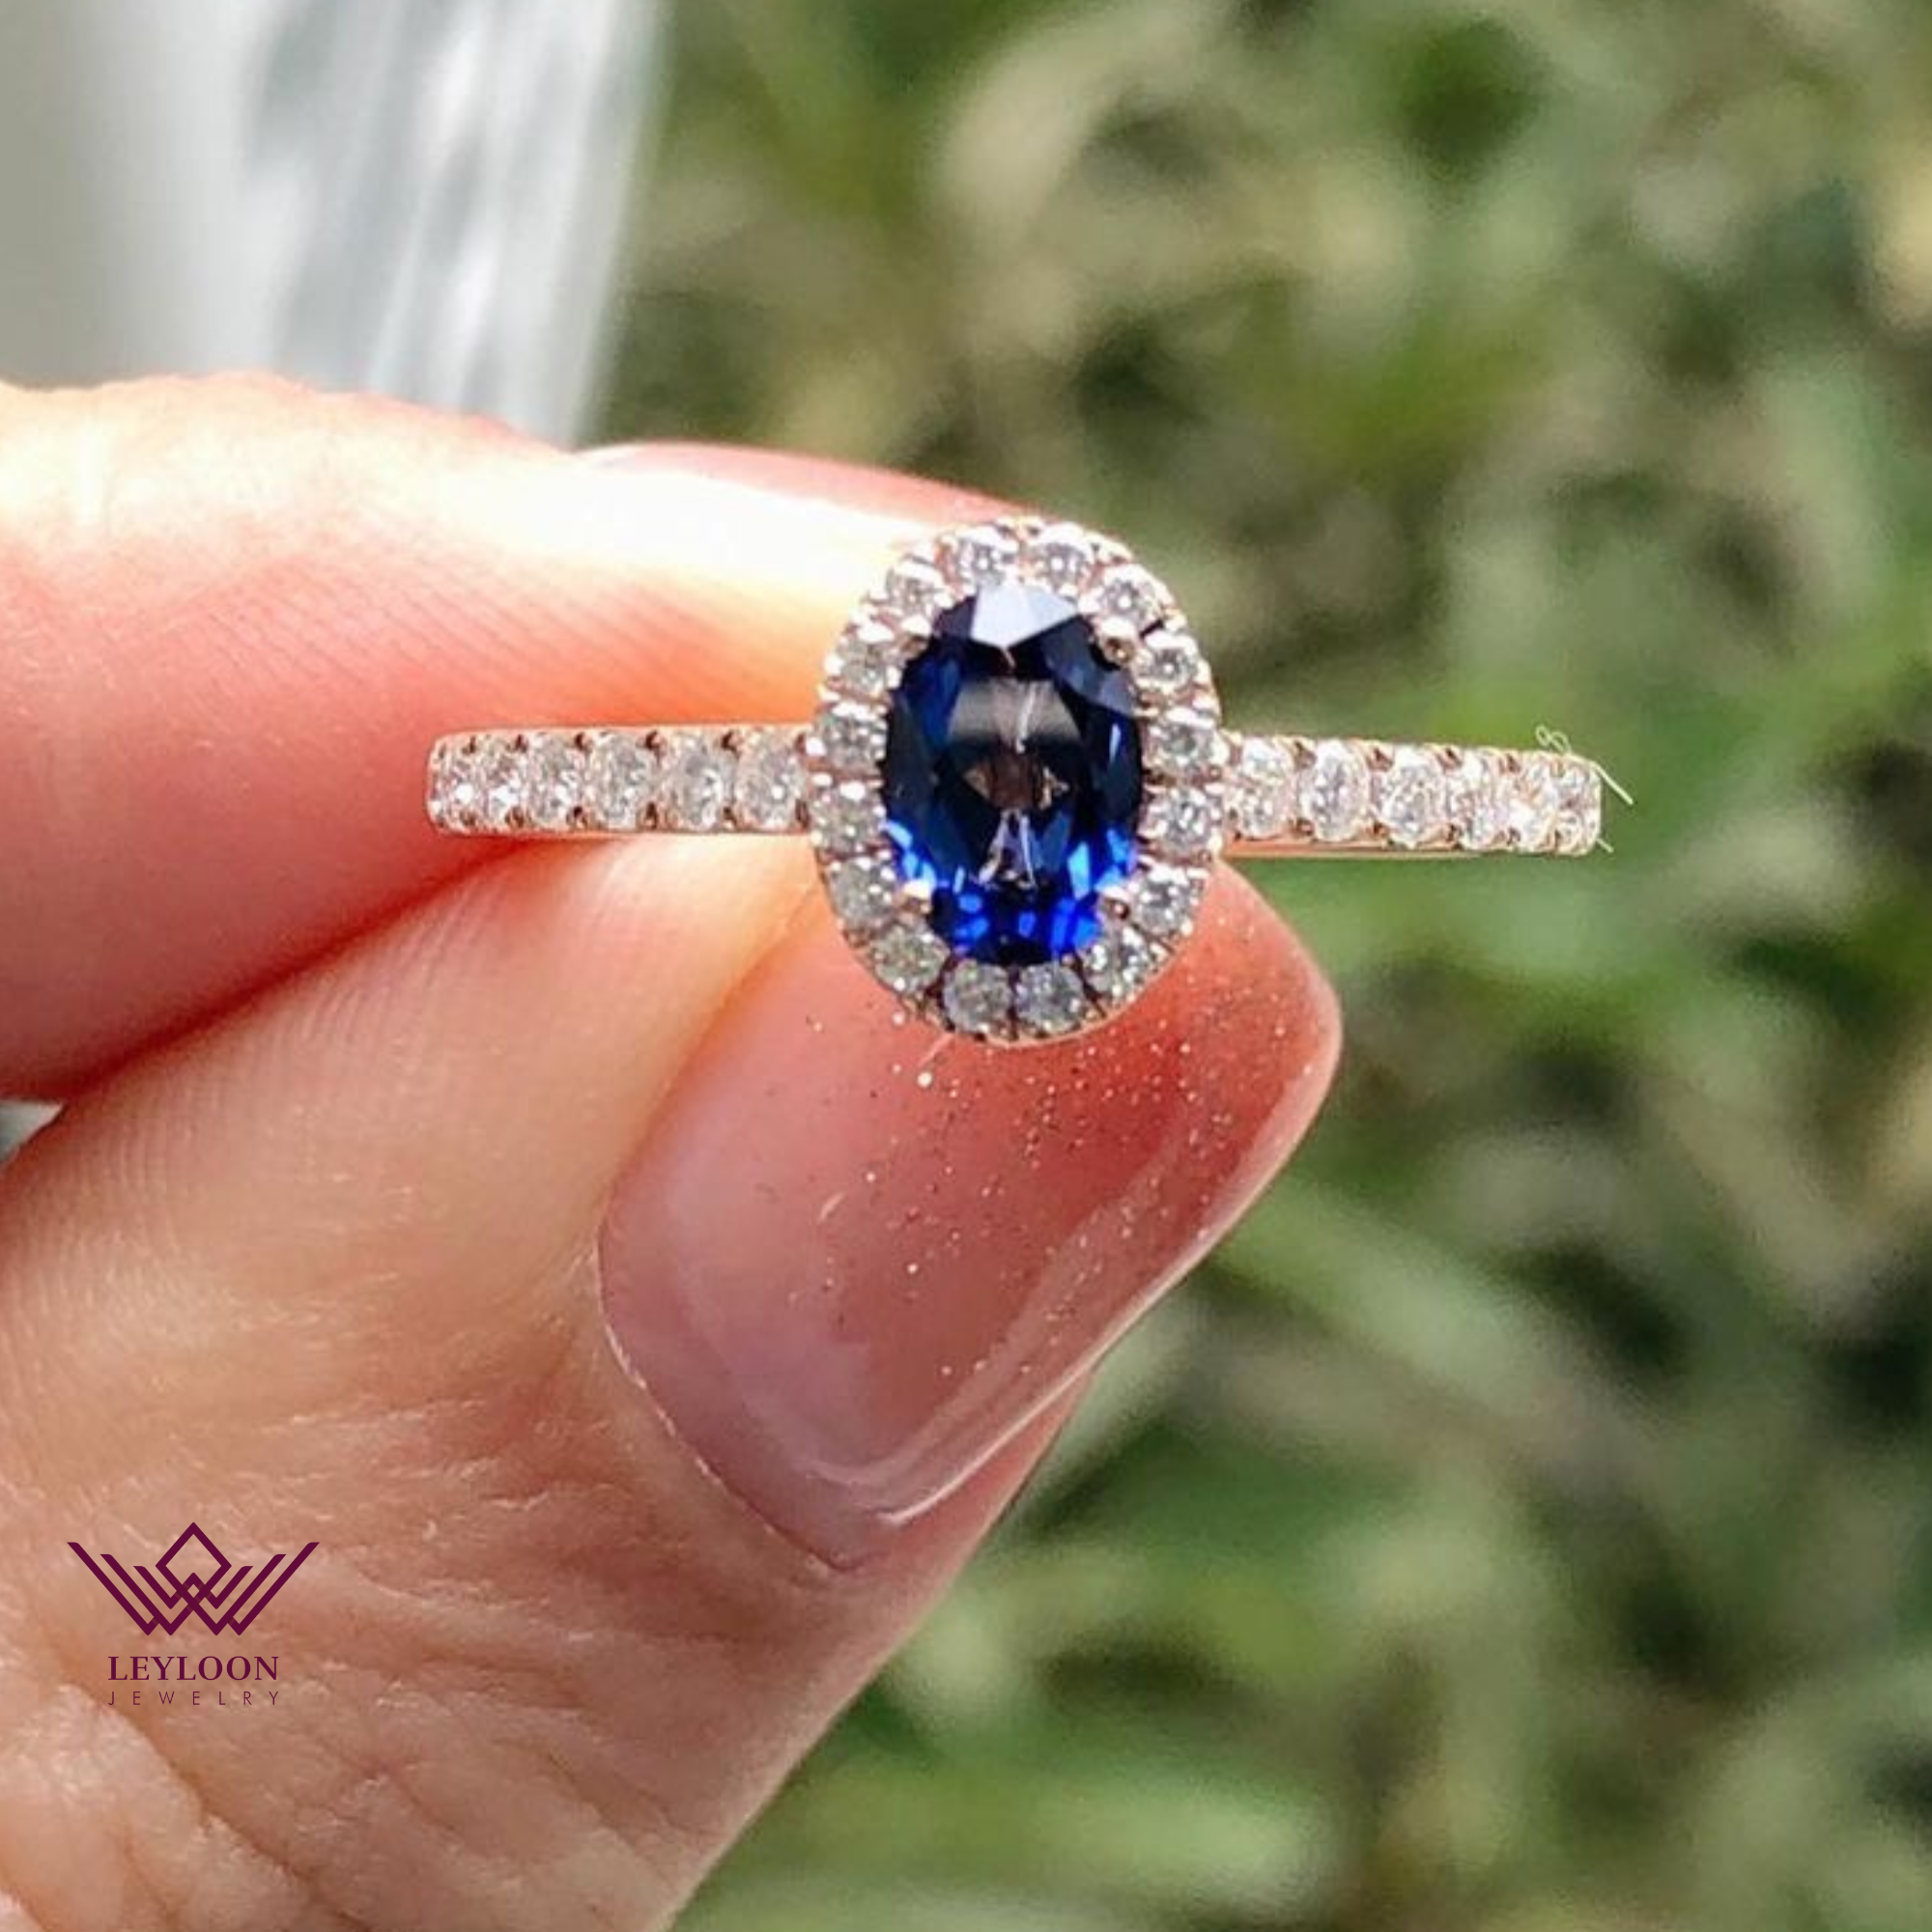 Huge Fancy Light Blue Color Ring, 11.81 Carat Blue Topaz Engagement Ring,  One of A Kind Promise Ring, 14k White Gold Diamond Band, Halo Ring - Etsy